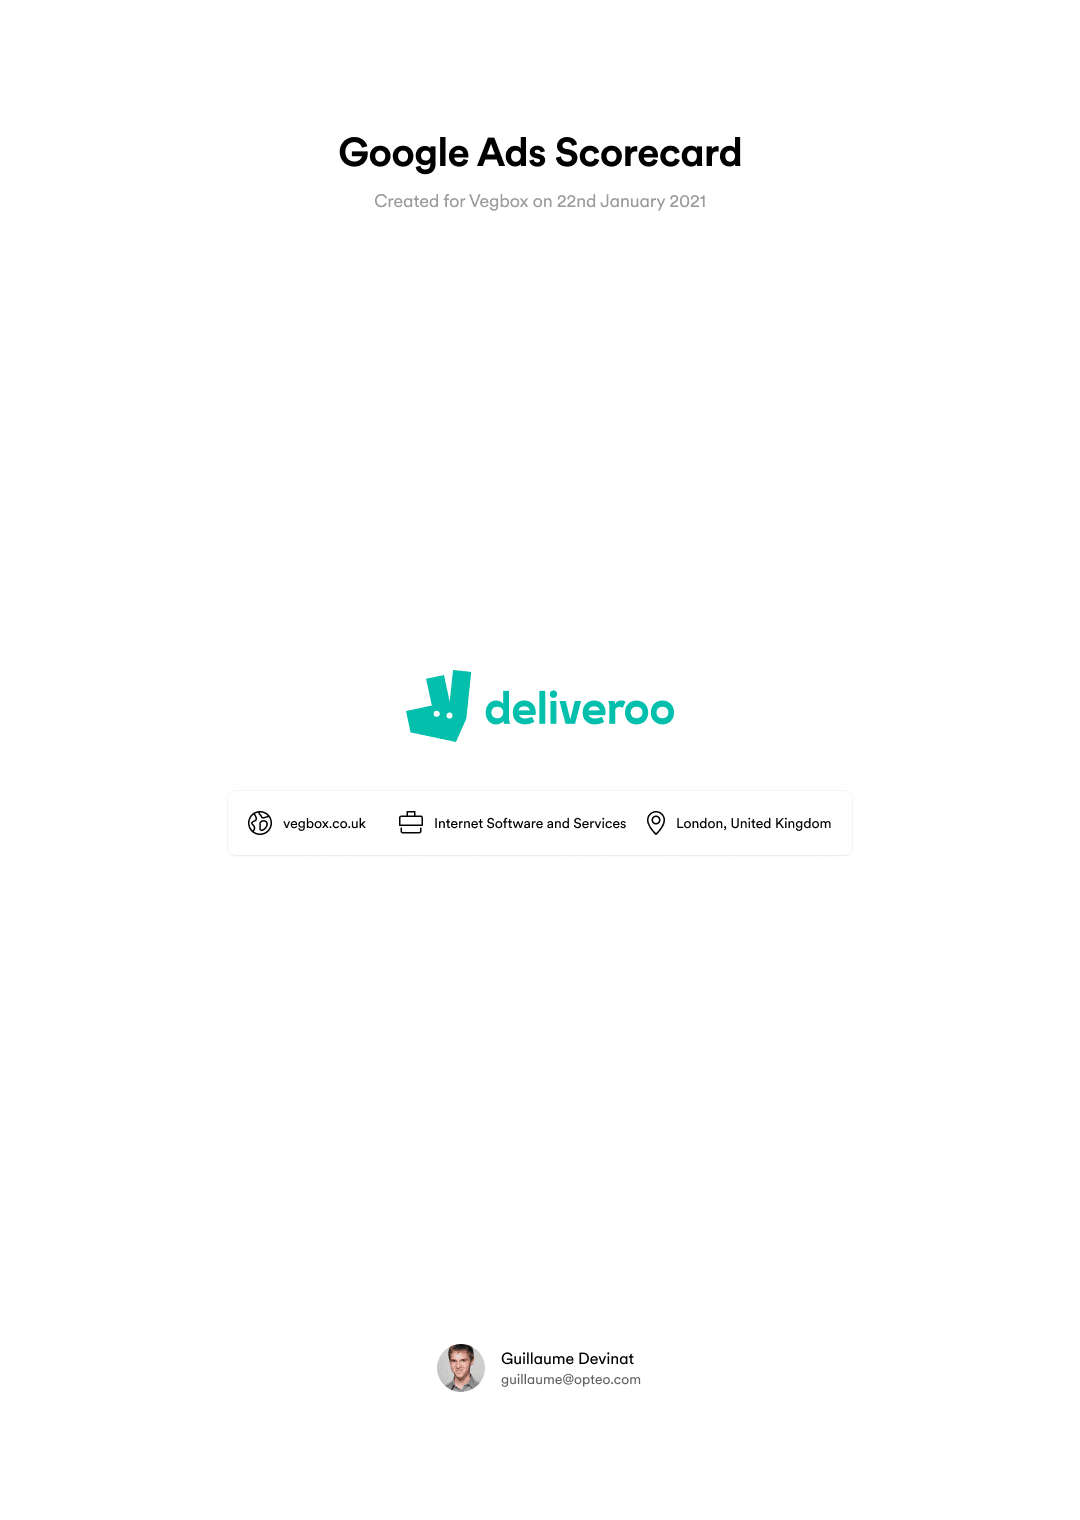 Exported Deliveroo scorecard cover.